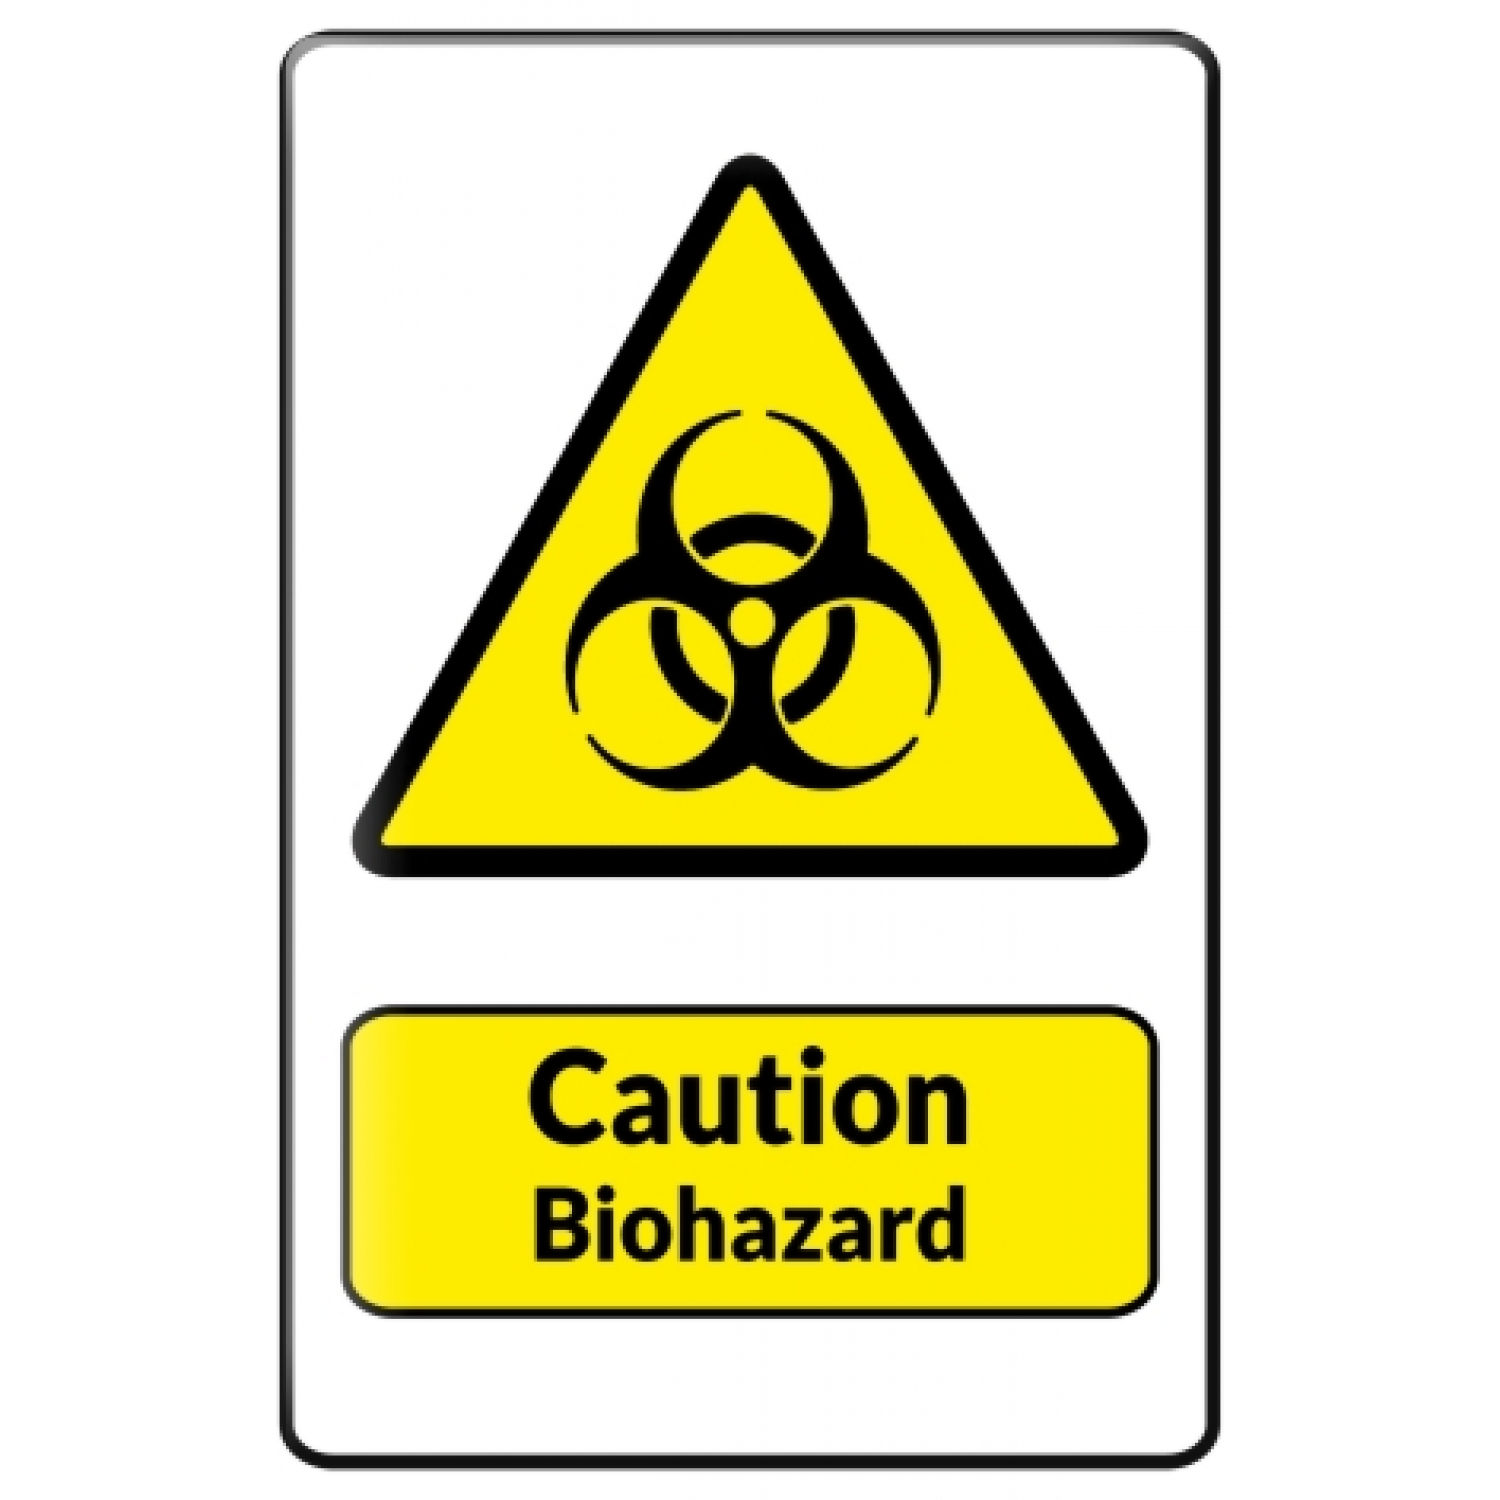 TIN Sign Warning Sign Caution Biohazard Symbol IN Black AND Yellow ...